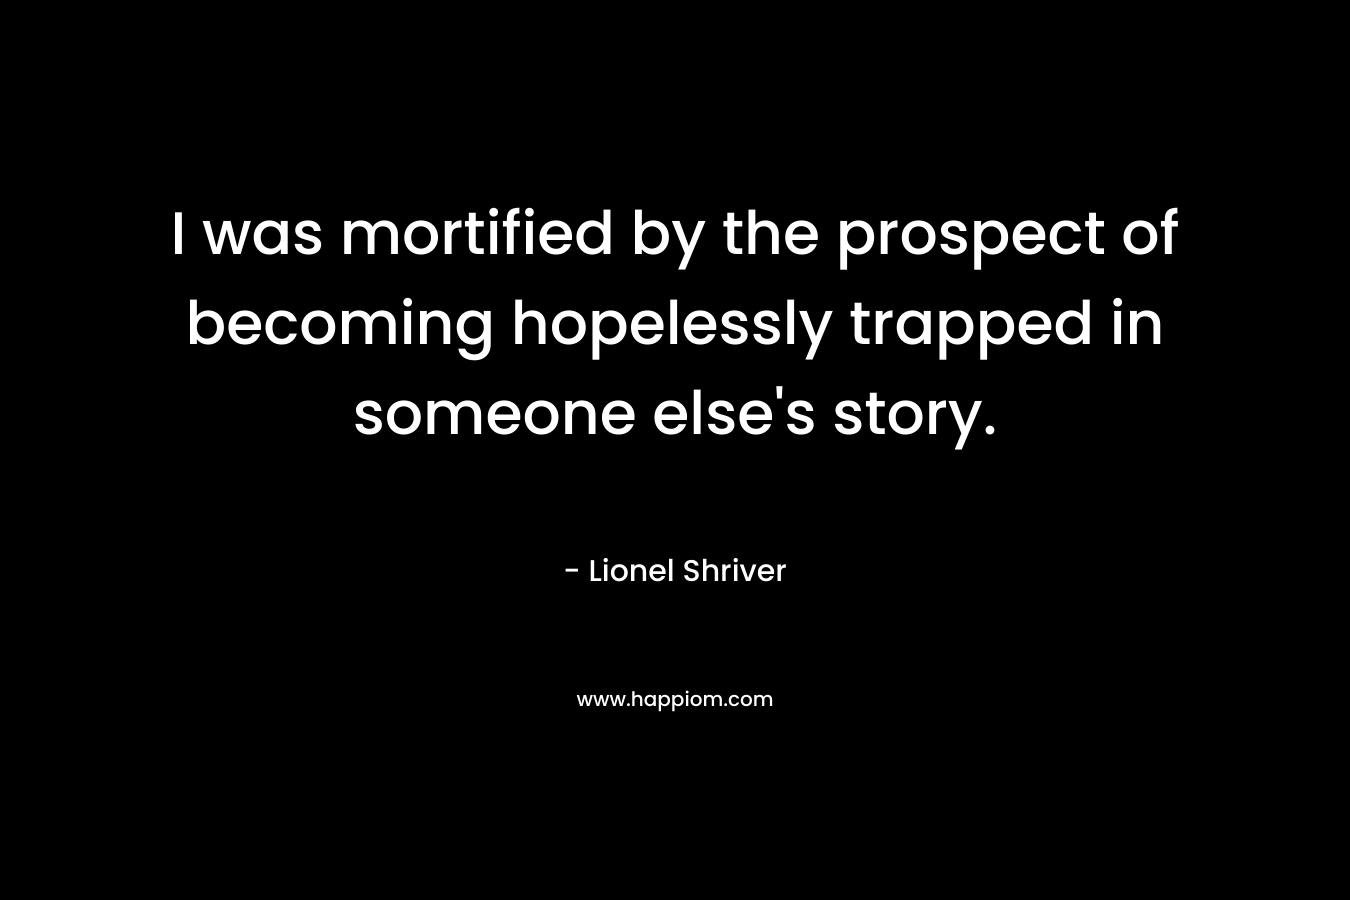 I was mortified by the prospect of becoming hopelessly trapped in someone else’s story. – Lionel Shriver